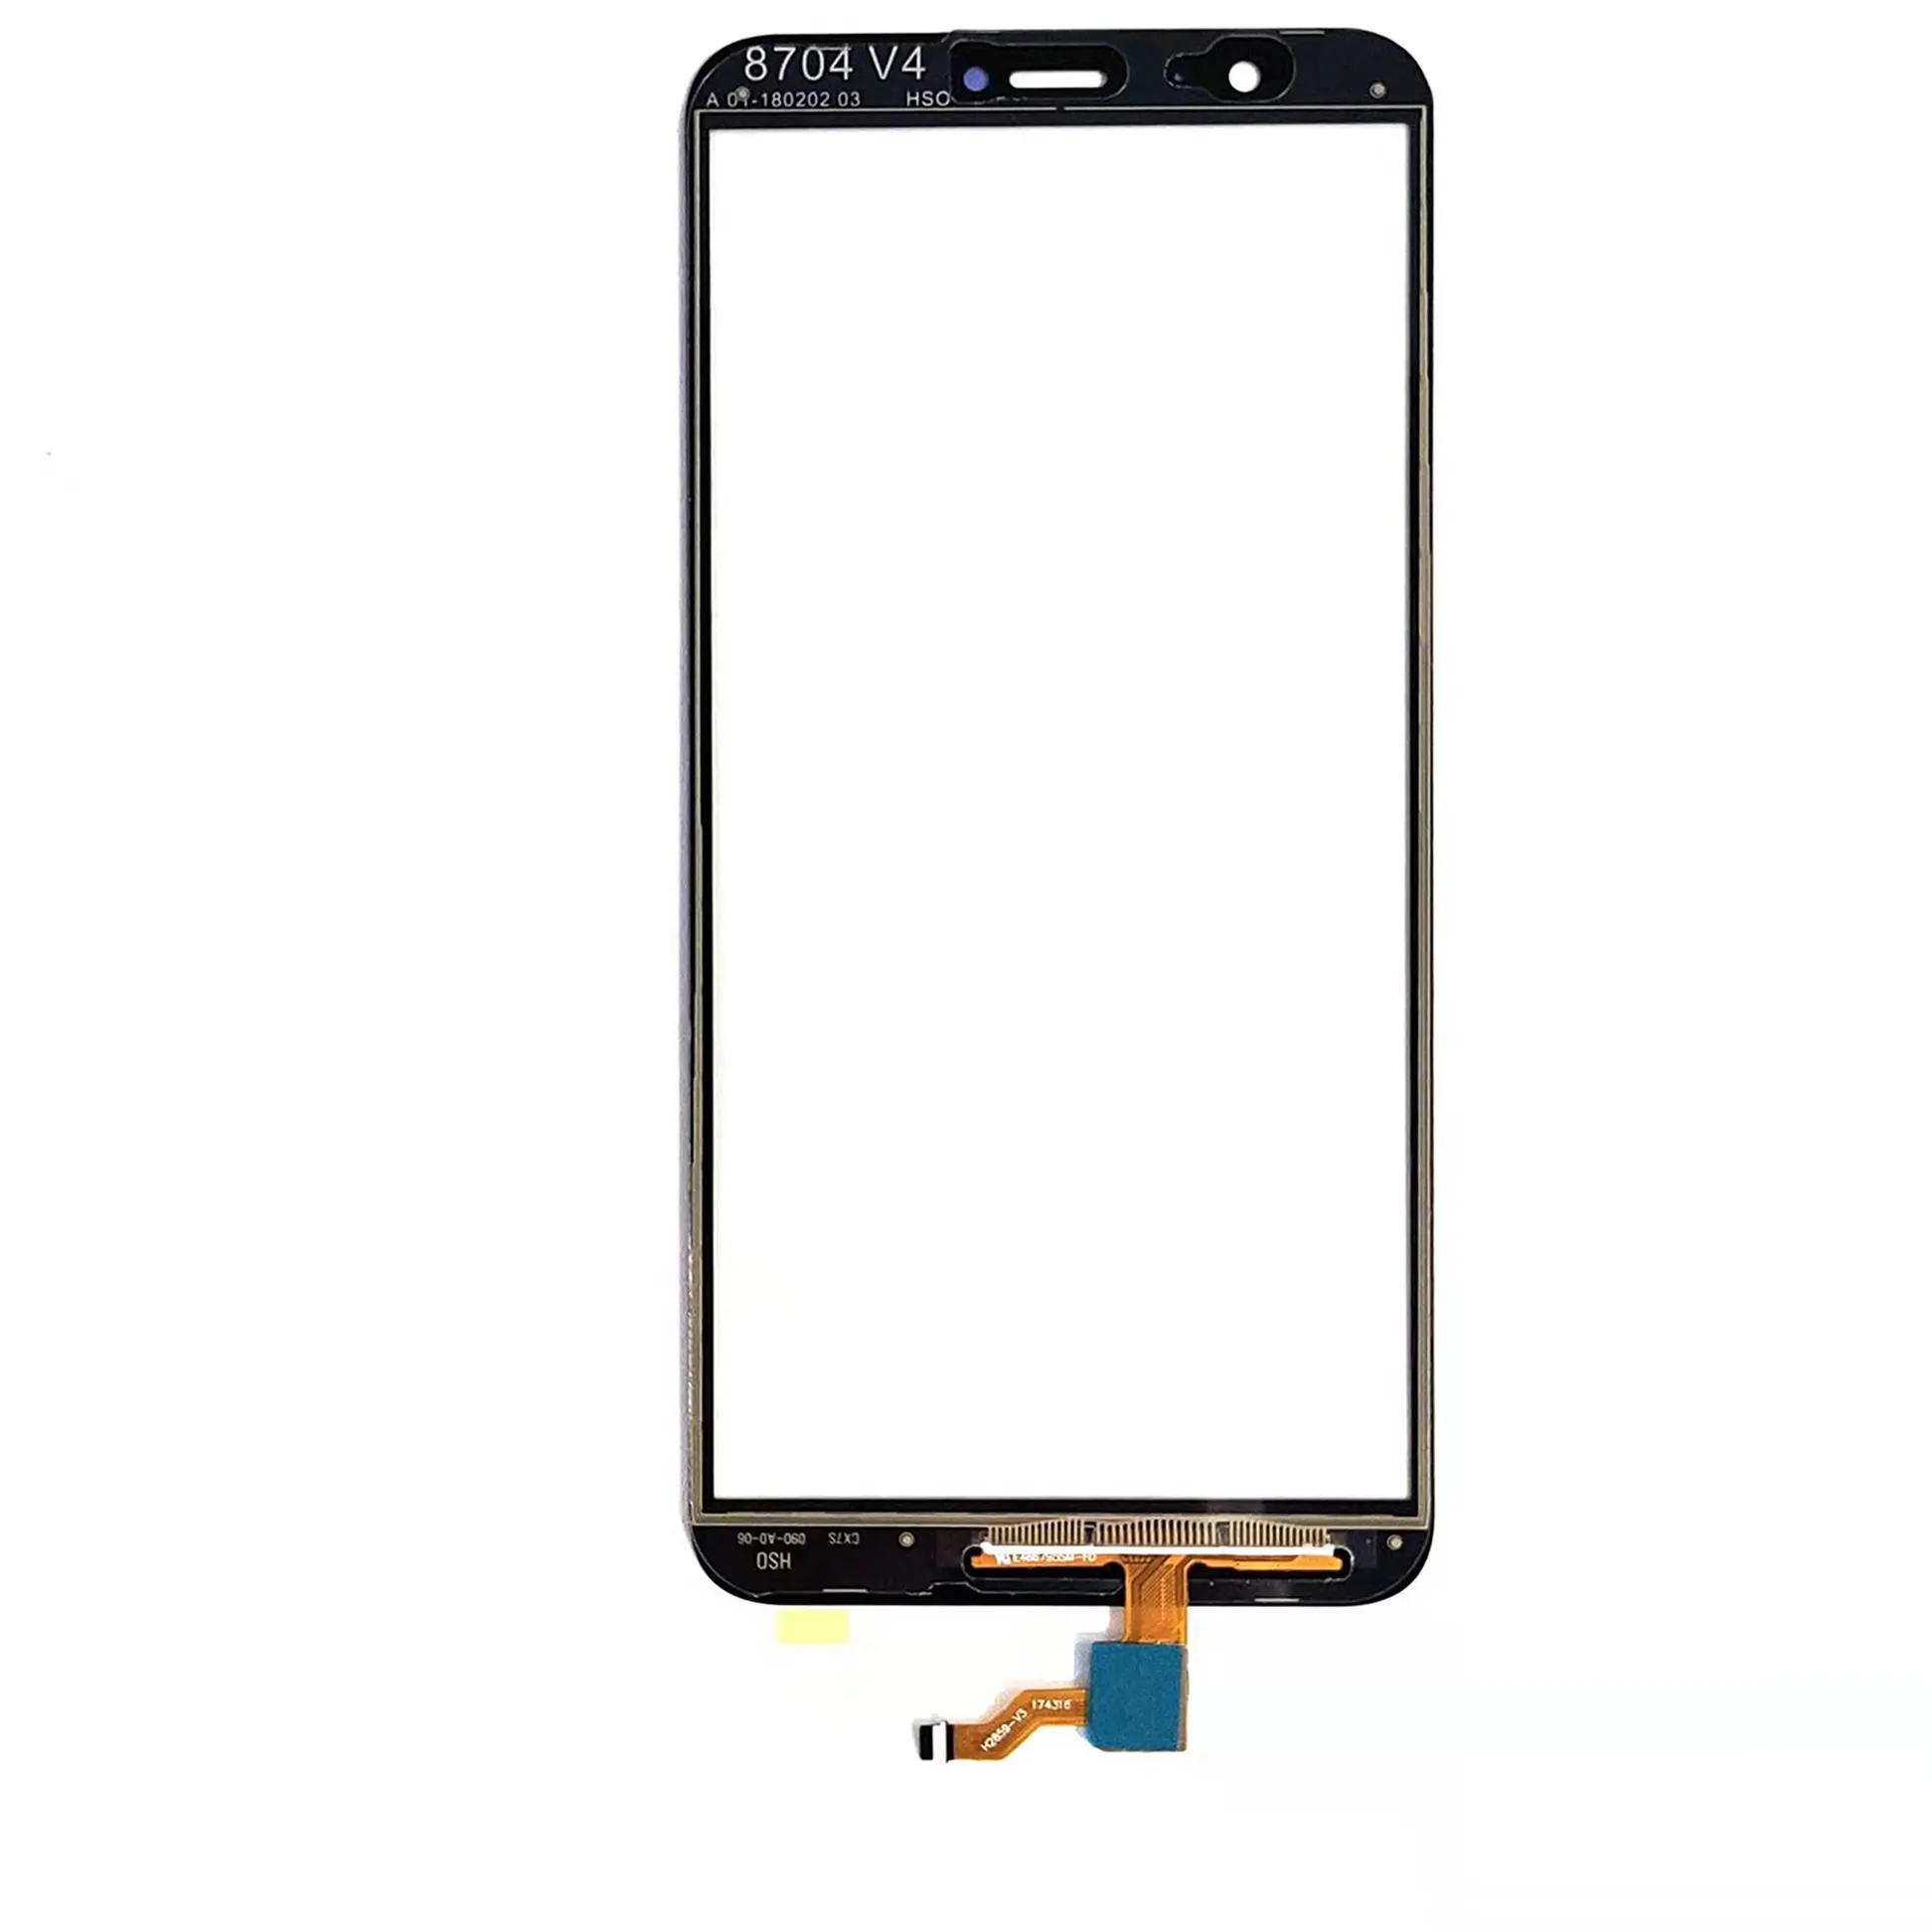 KULI Outer glass touch panel screen for Huawei Enjoy 7S TP front glass mobile touch screen digitizer for Huawei P smart TP